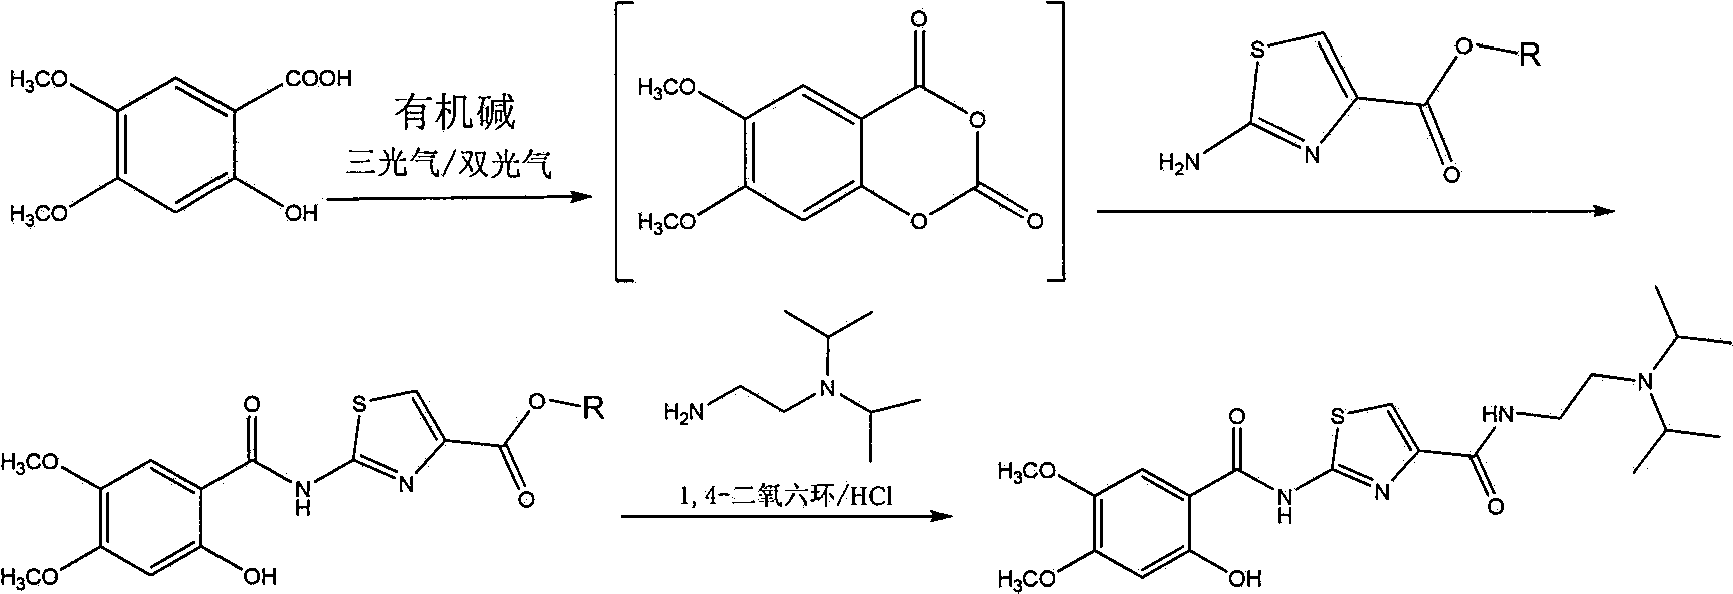 6,7-dimethoxy-benzo[d][1,3]dioxin-2,4-dione and preparation method thereof